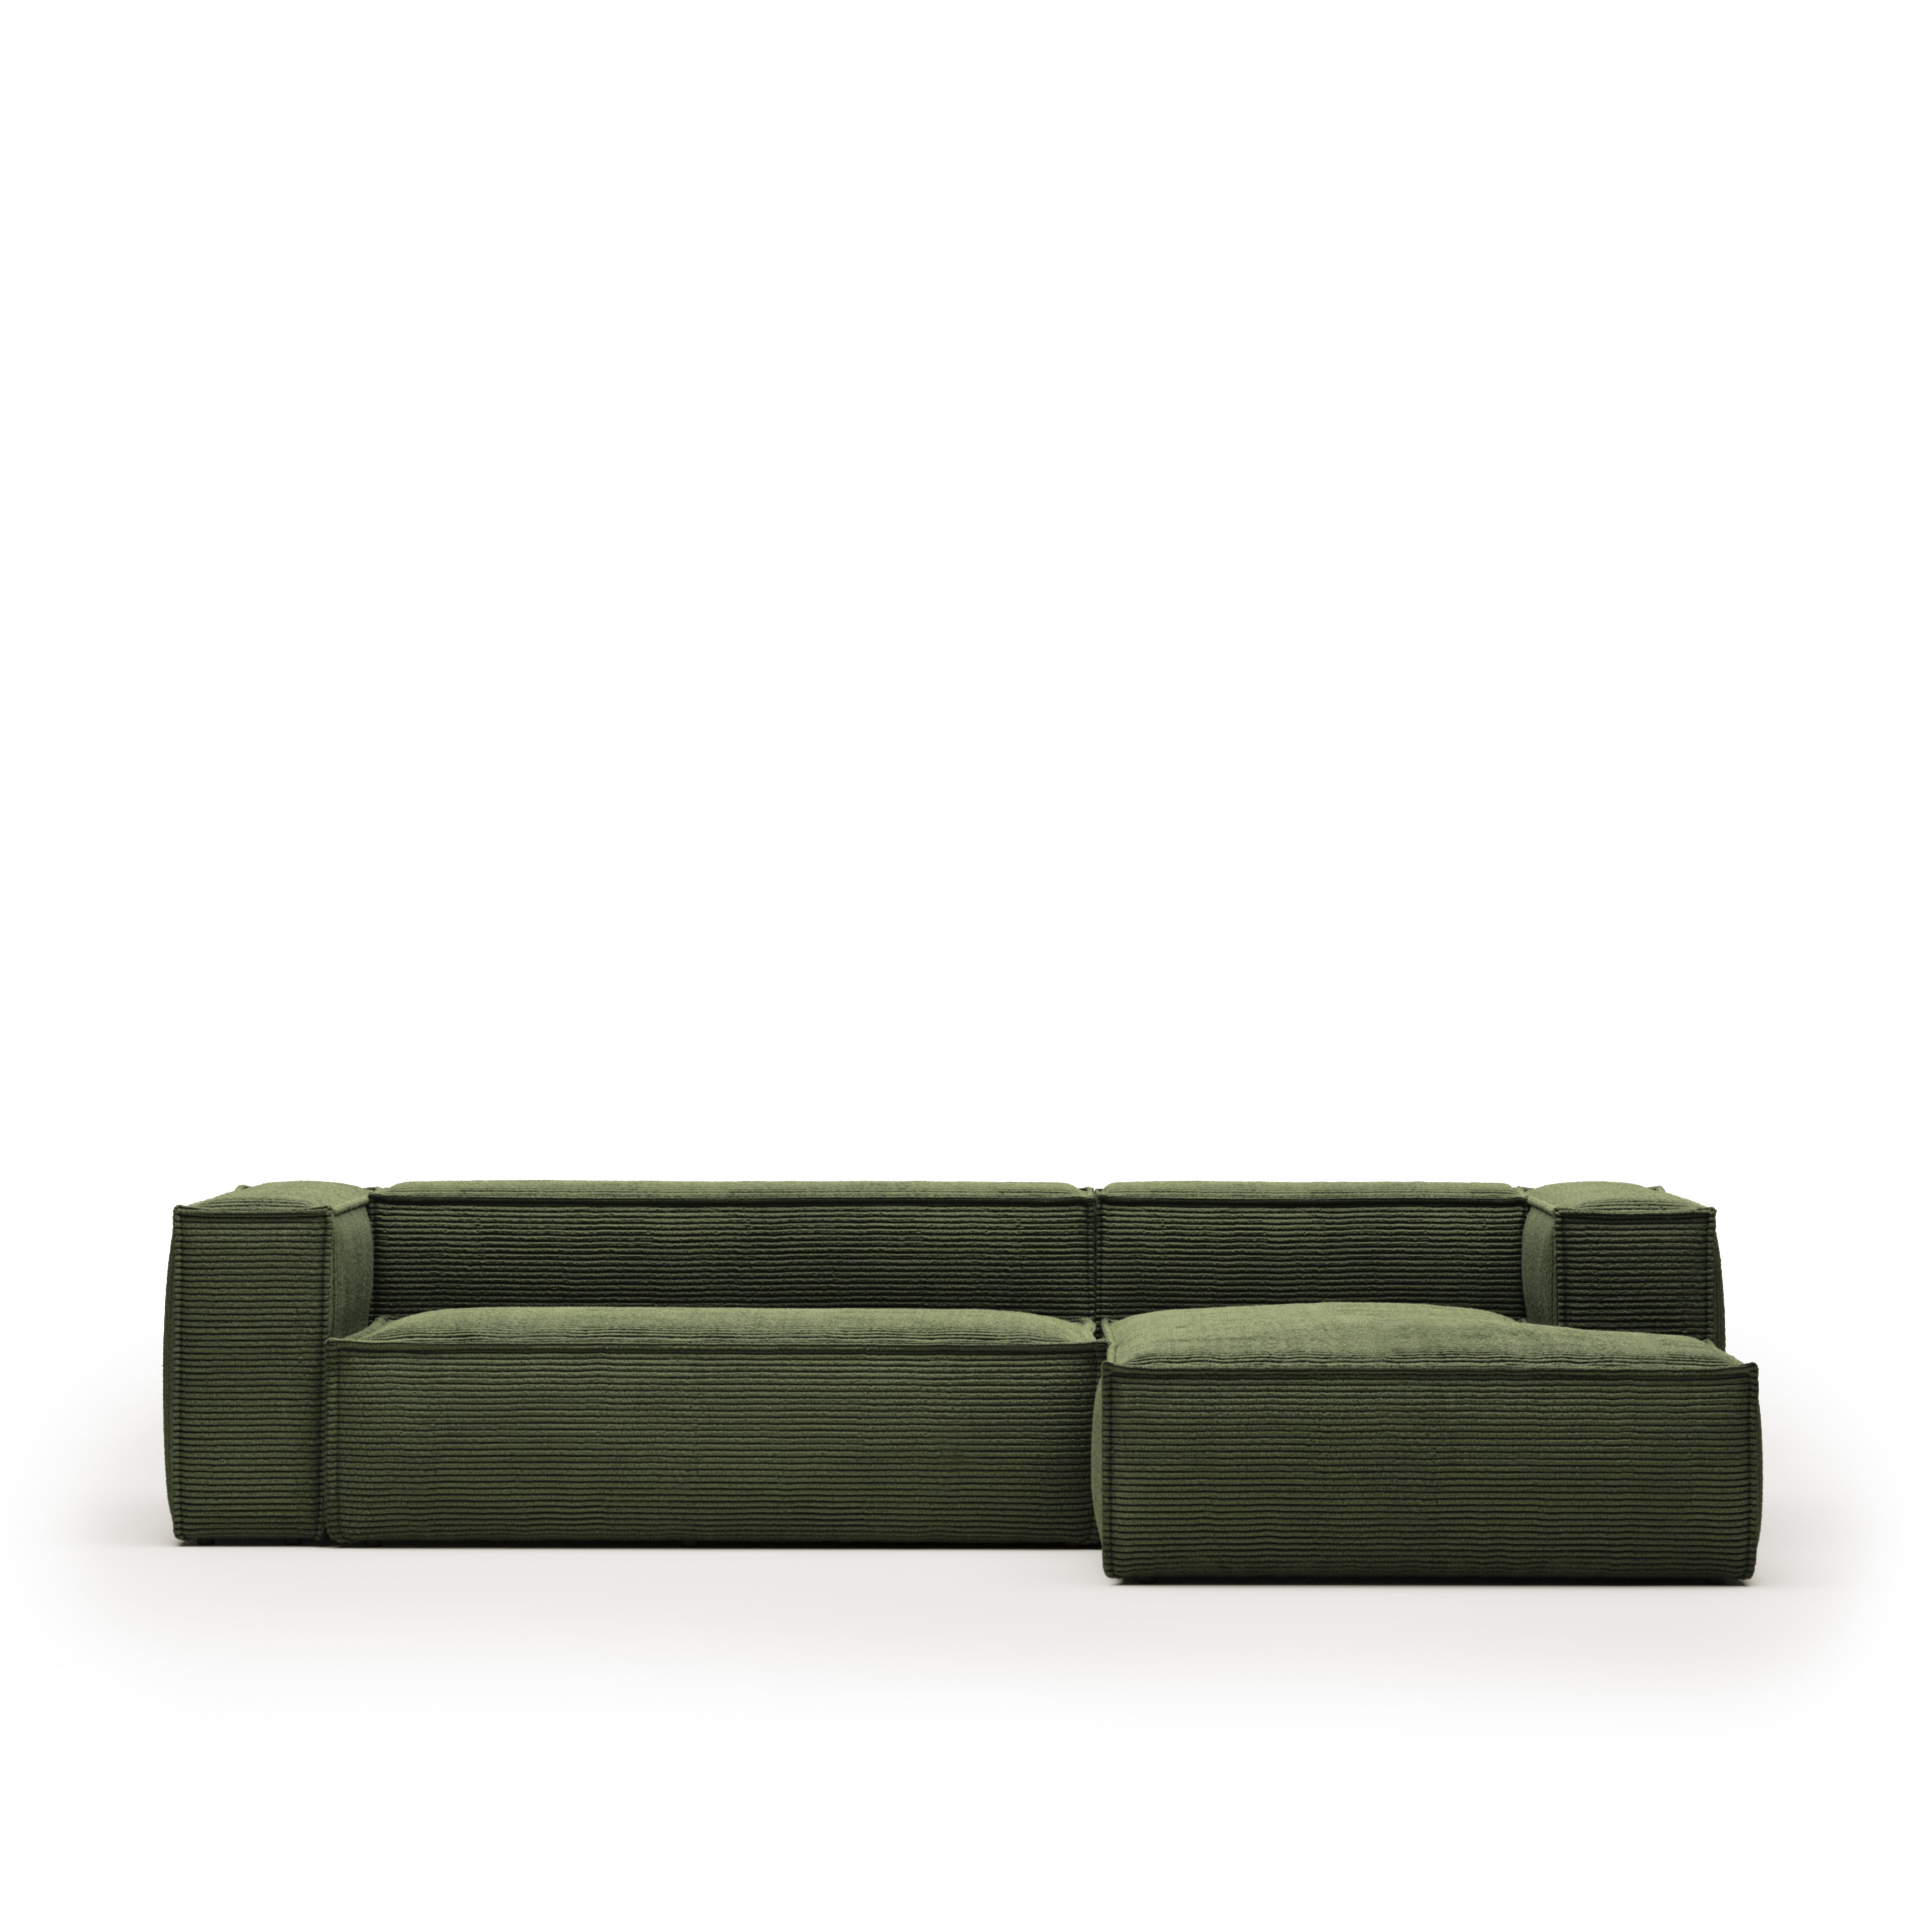 Blok 3-person sofa with chaise longue on the right in green corduroy, 300 cm